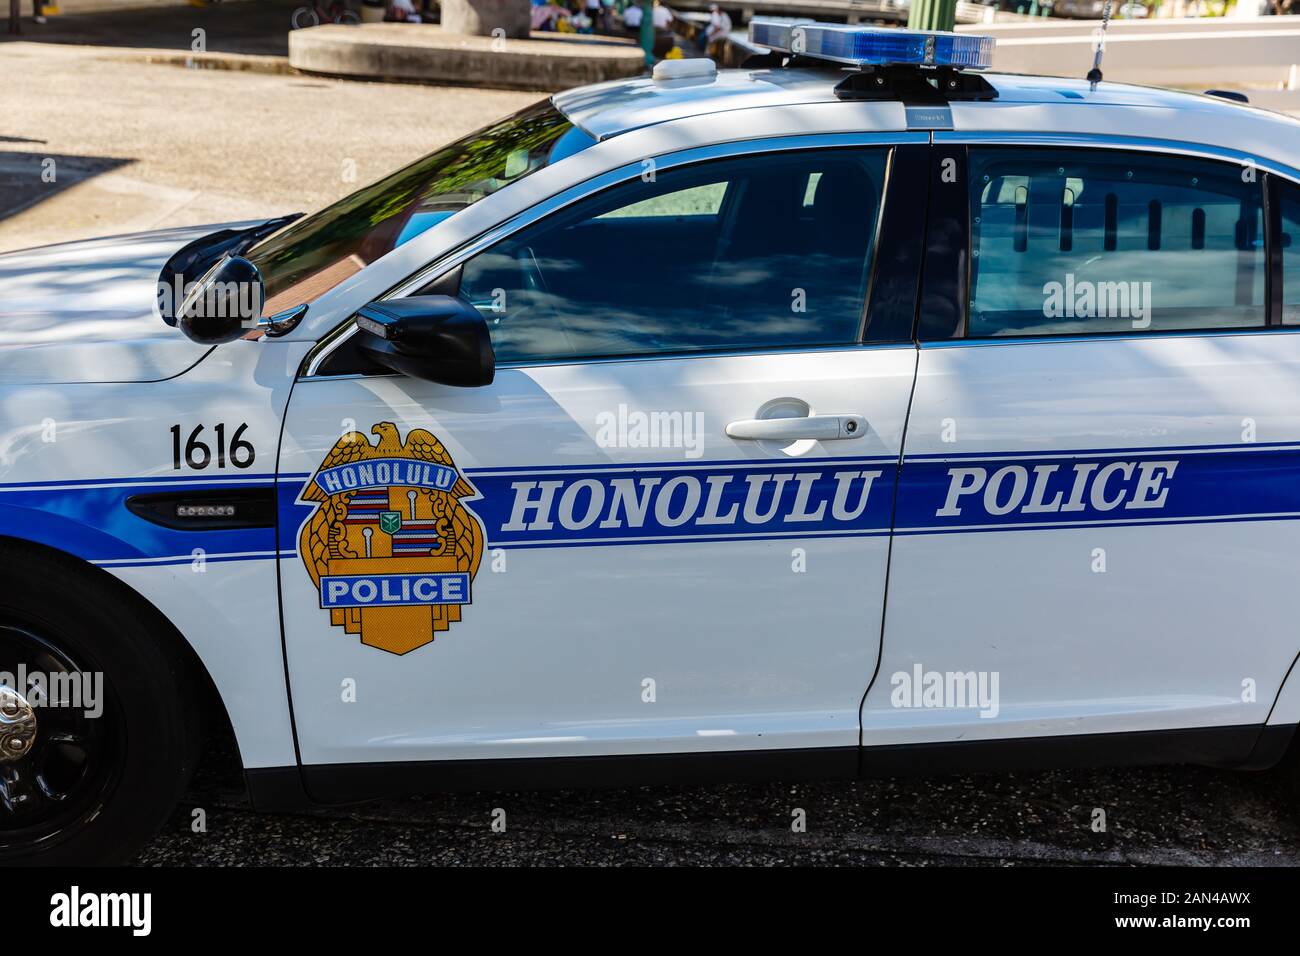 Honolulu, Oahu, Hawaii - November 04, 2019: Police car of the Honolulu Police Department. The HPD has more than 2500 employees and serves the entire i Stock Photo